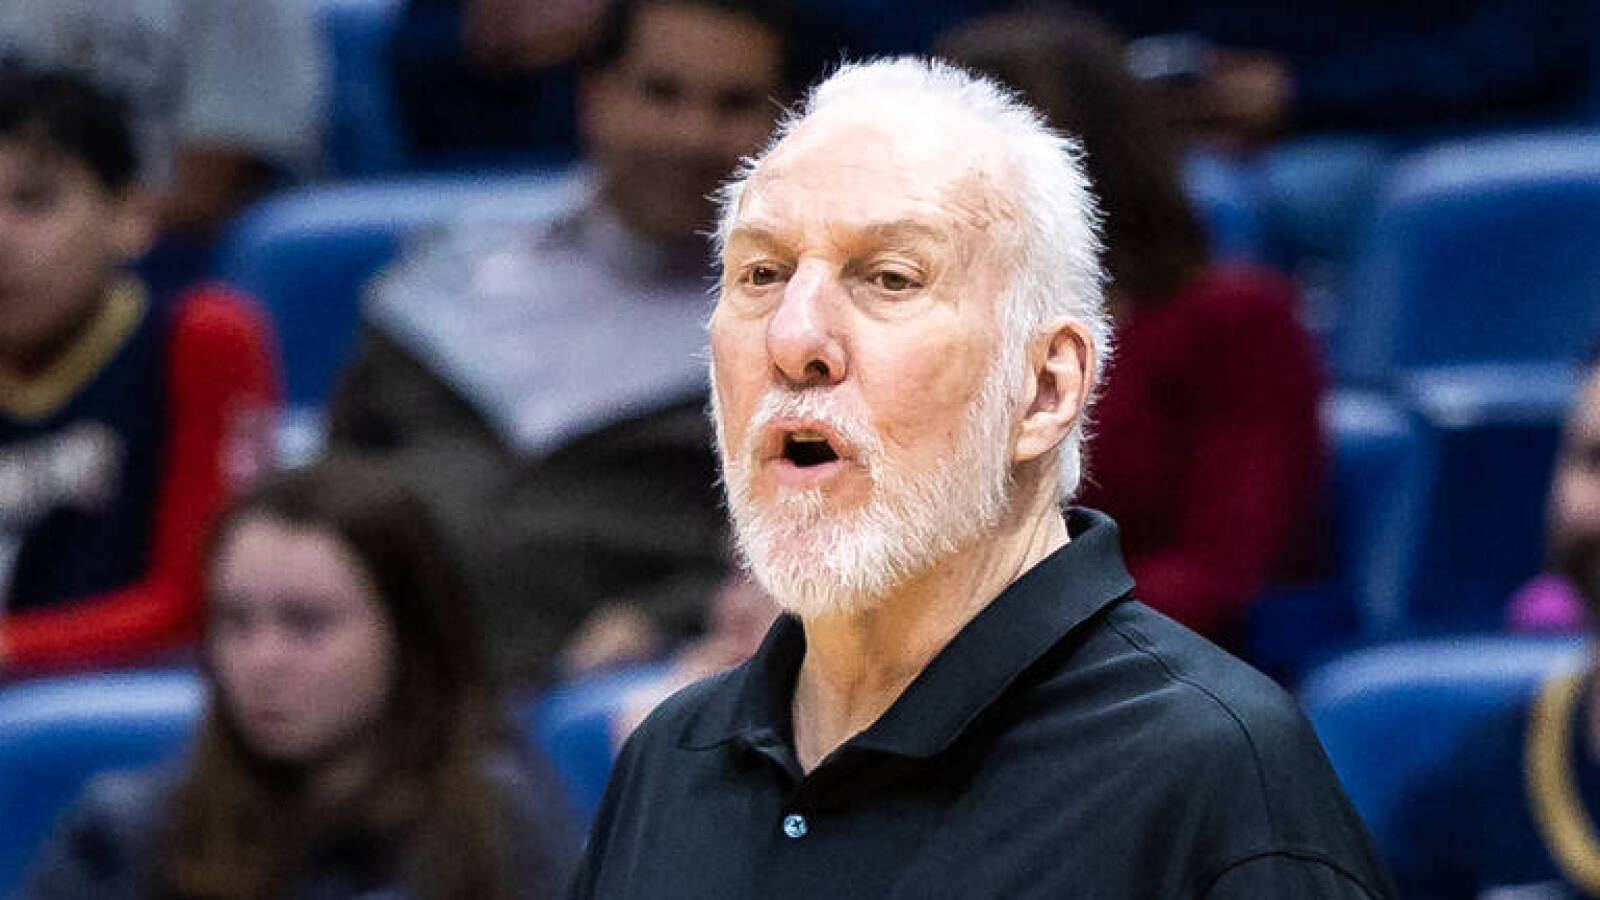 Spurs sign HC Gregg Popovich to new five-year contract